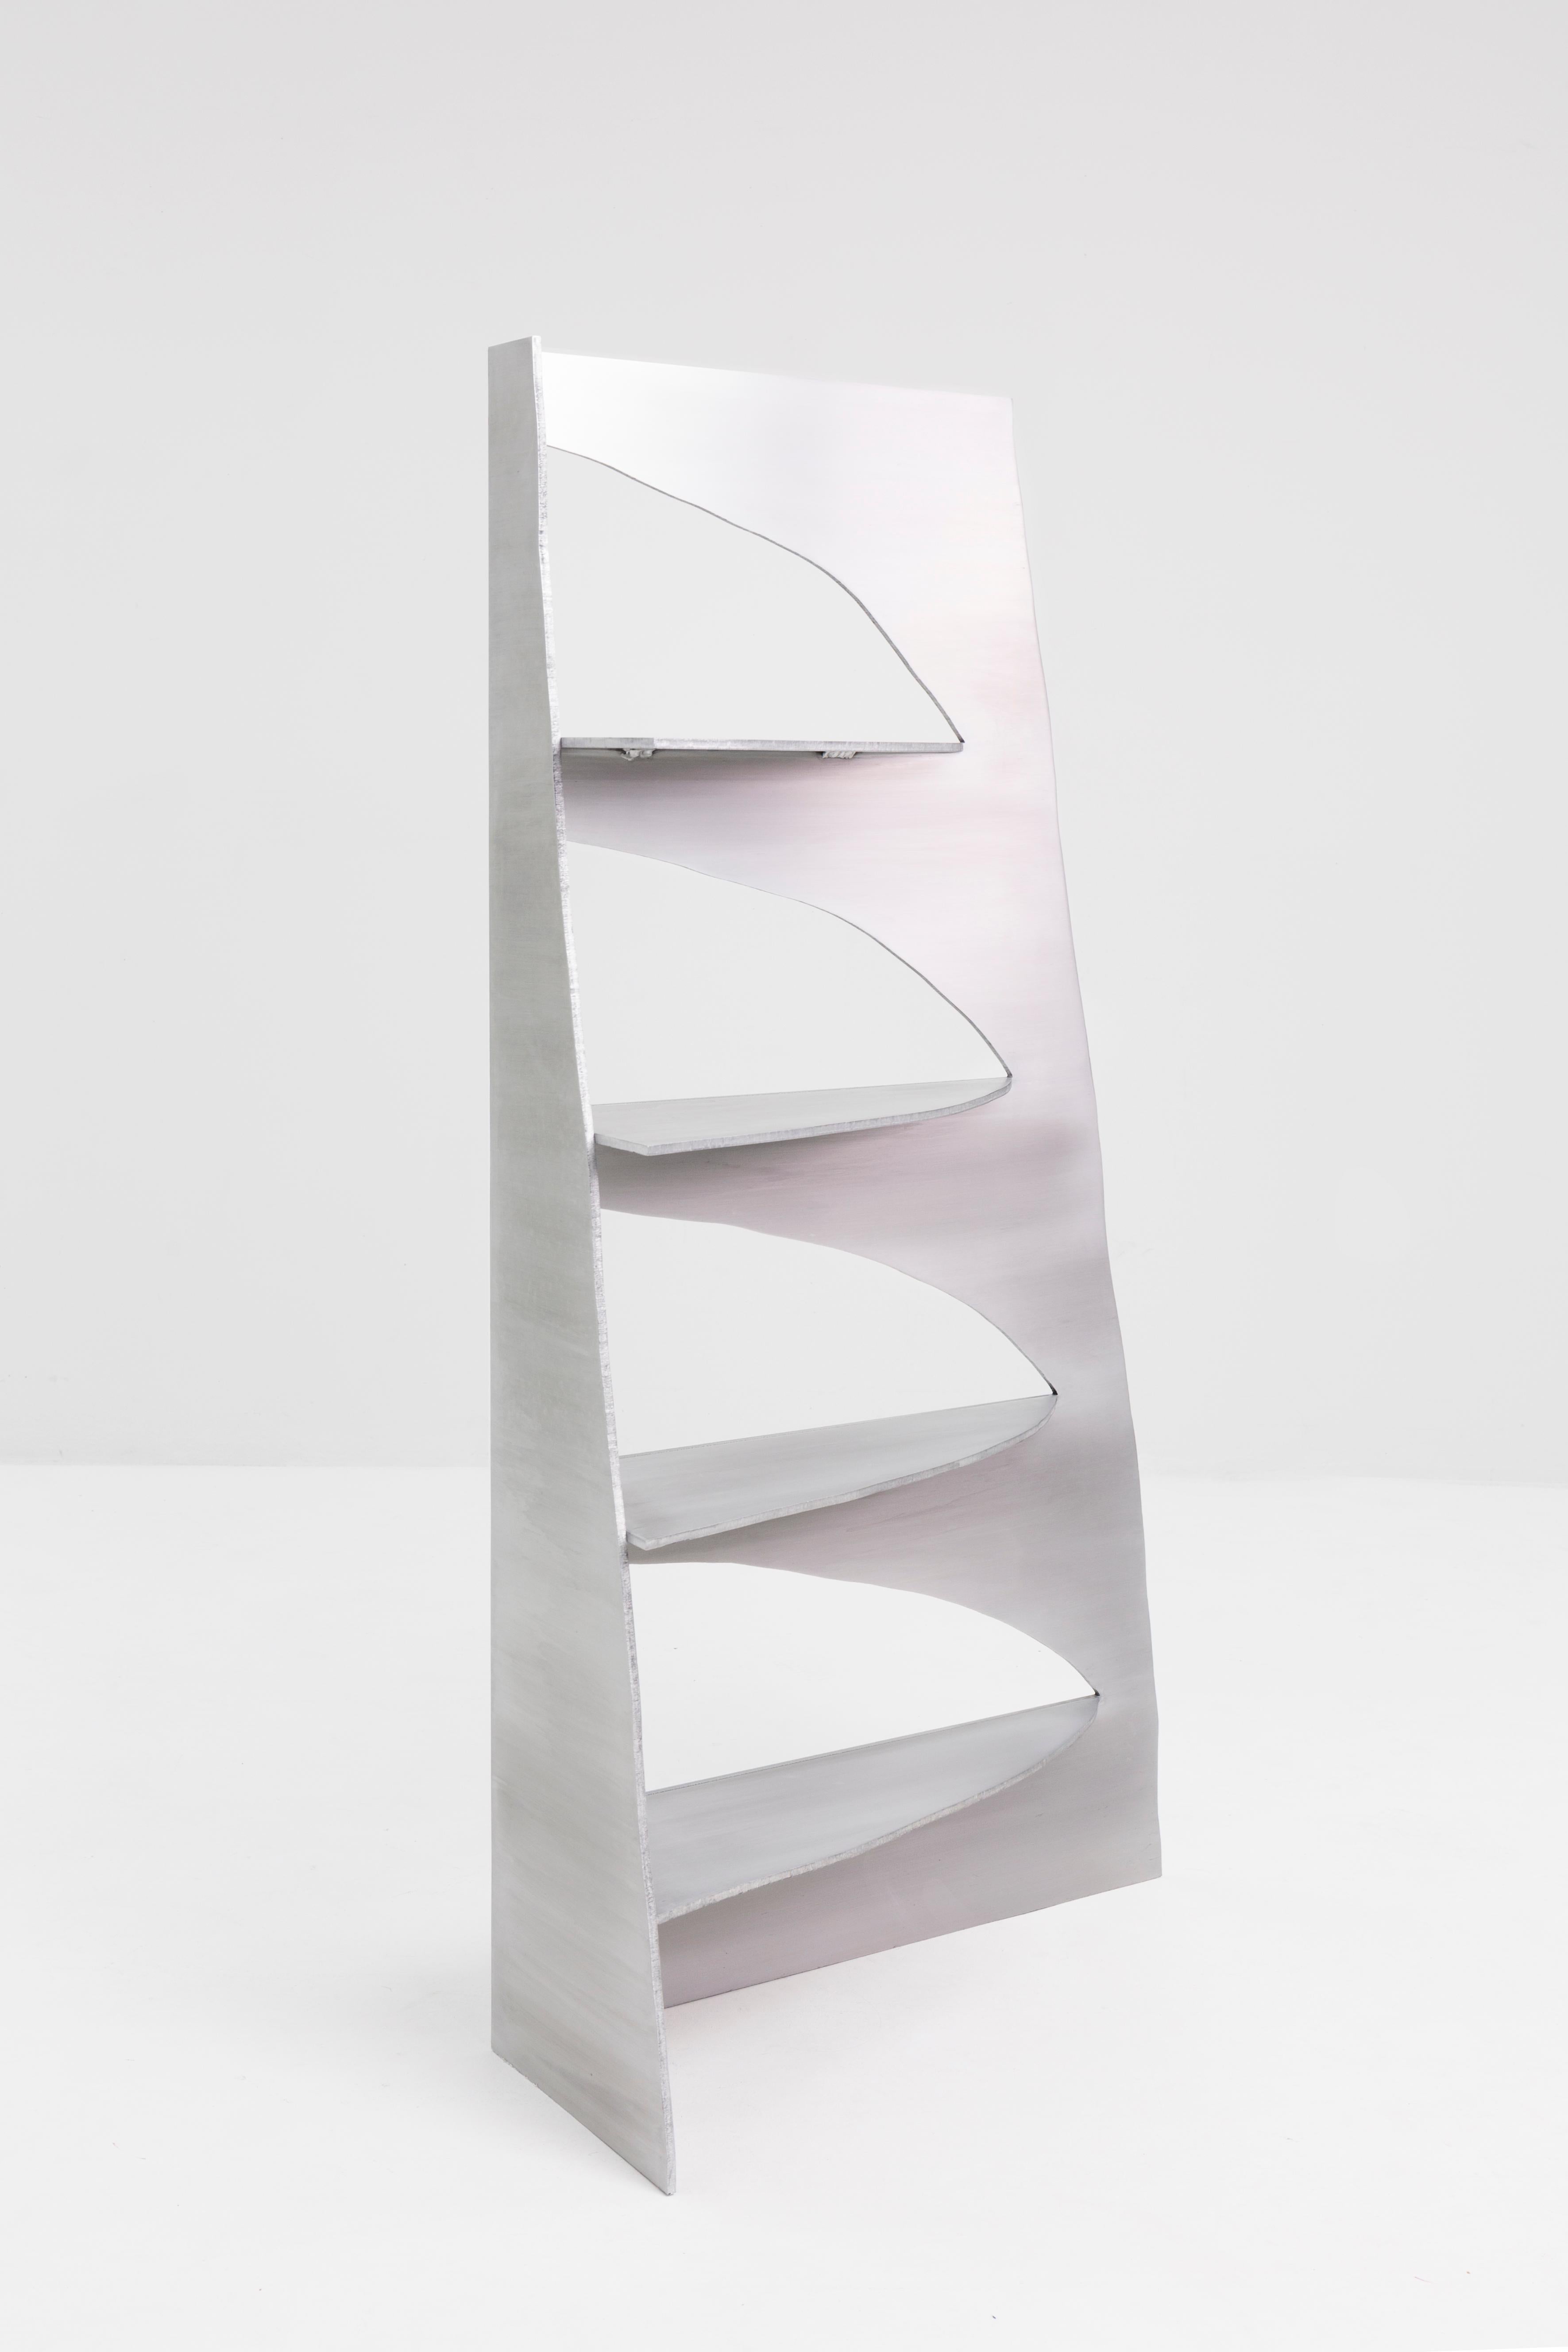 Aluminum rational jigsaw shelf by Studio Julien Manaira
Dimensions: 72.5 x 25 x 140 cm
Materials: Brushed and waxed aluminum


The intention behind this project is to highlight the traces from the actions of the maker. In this sense, the choice